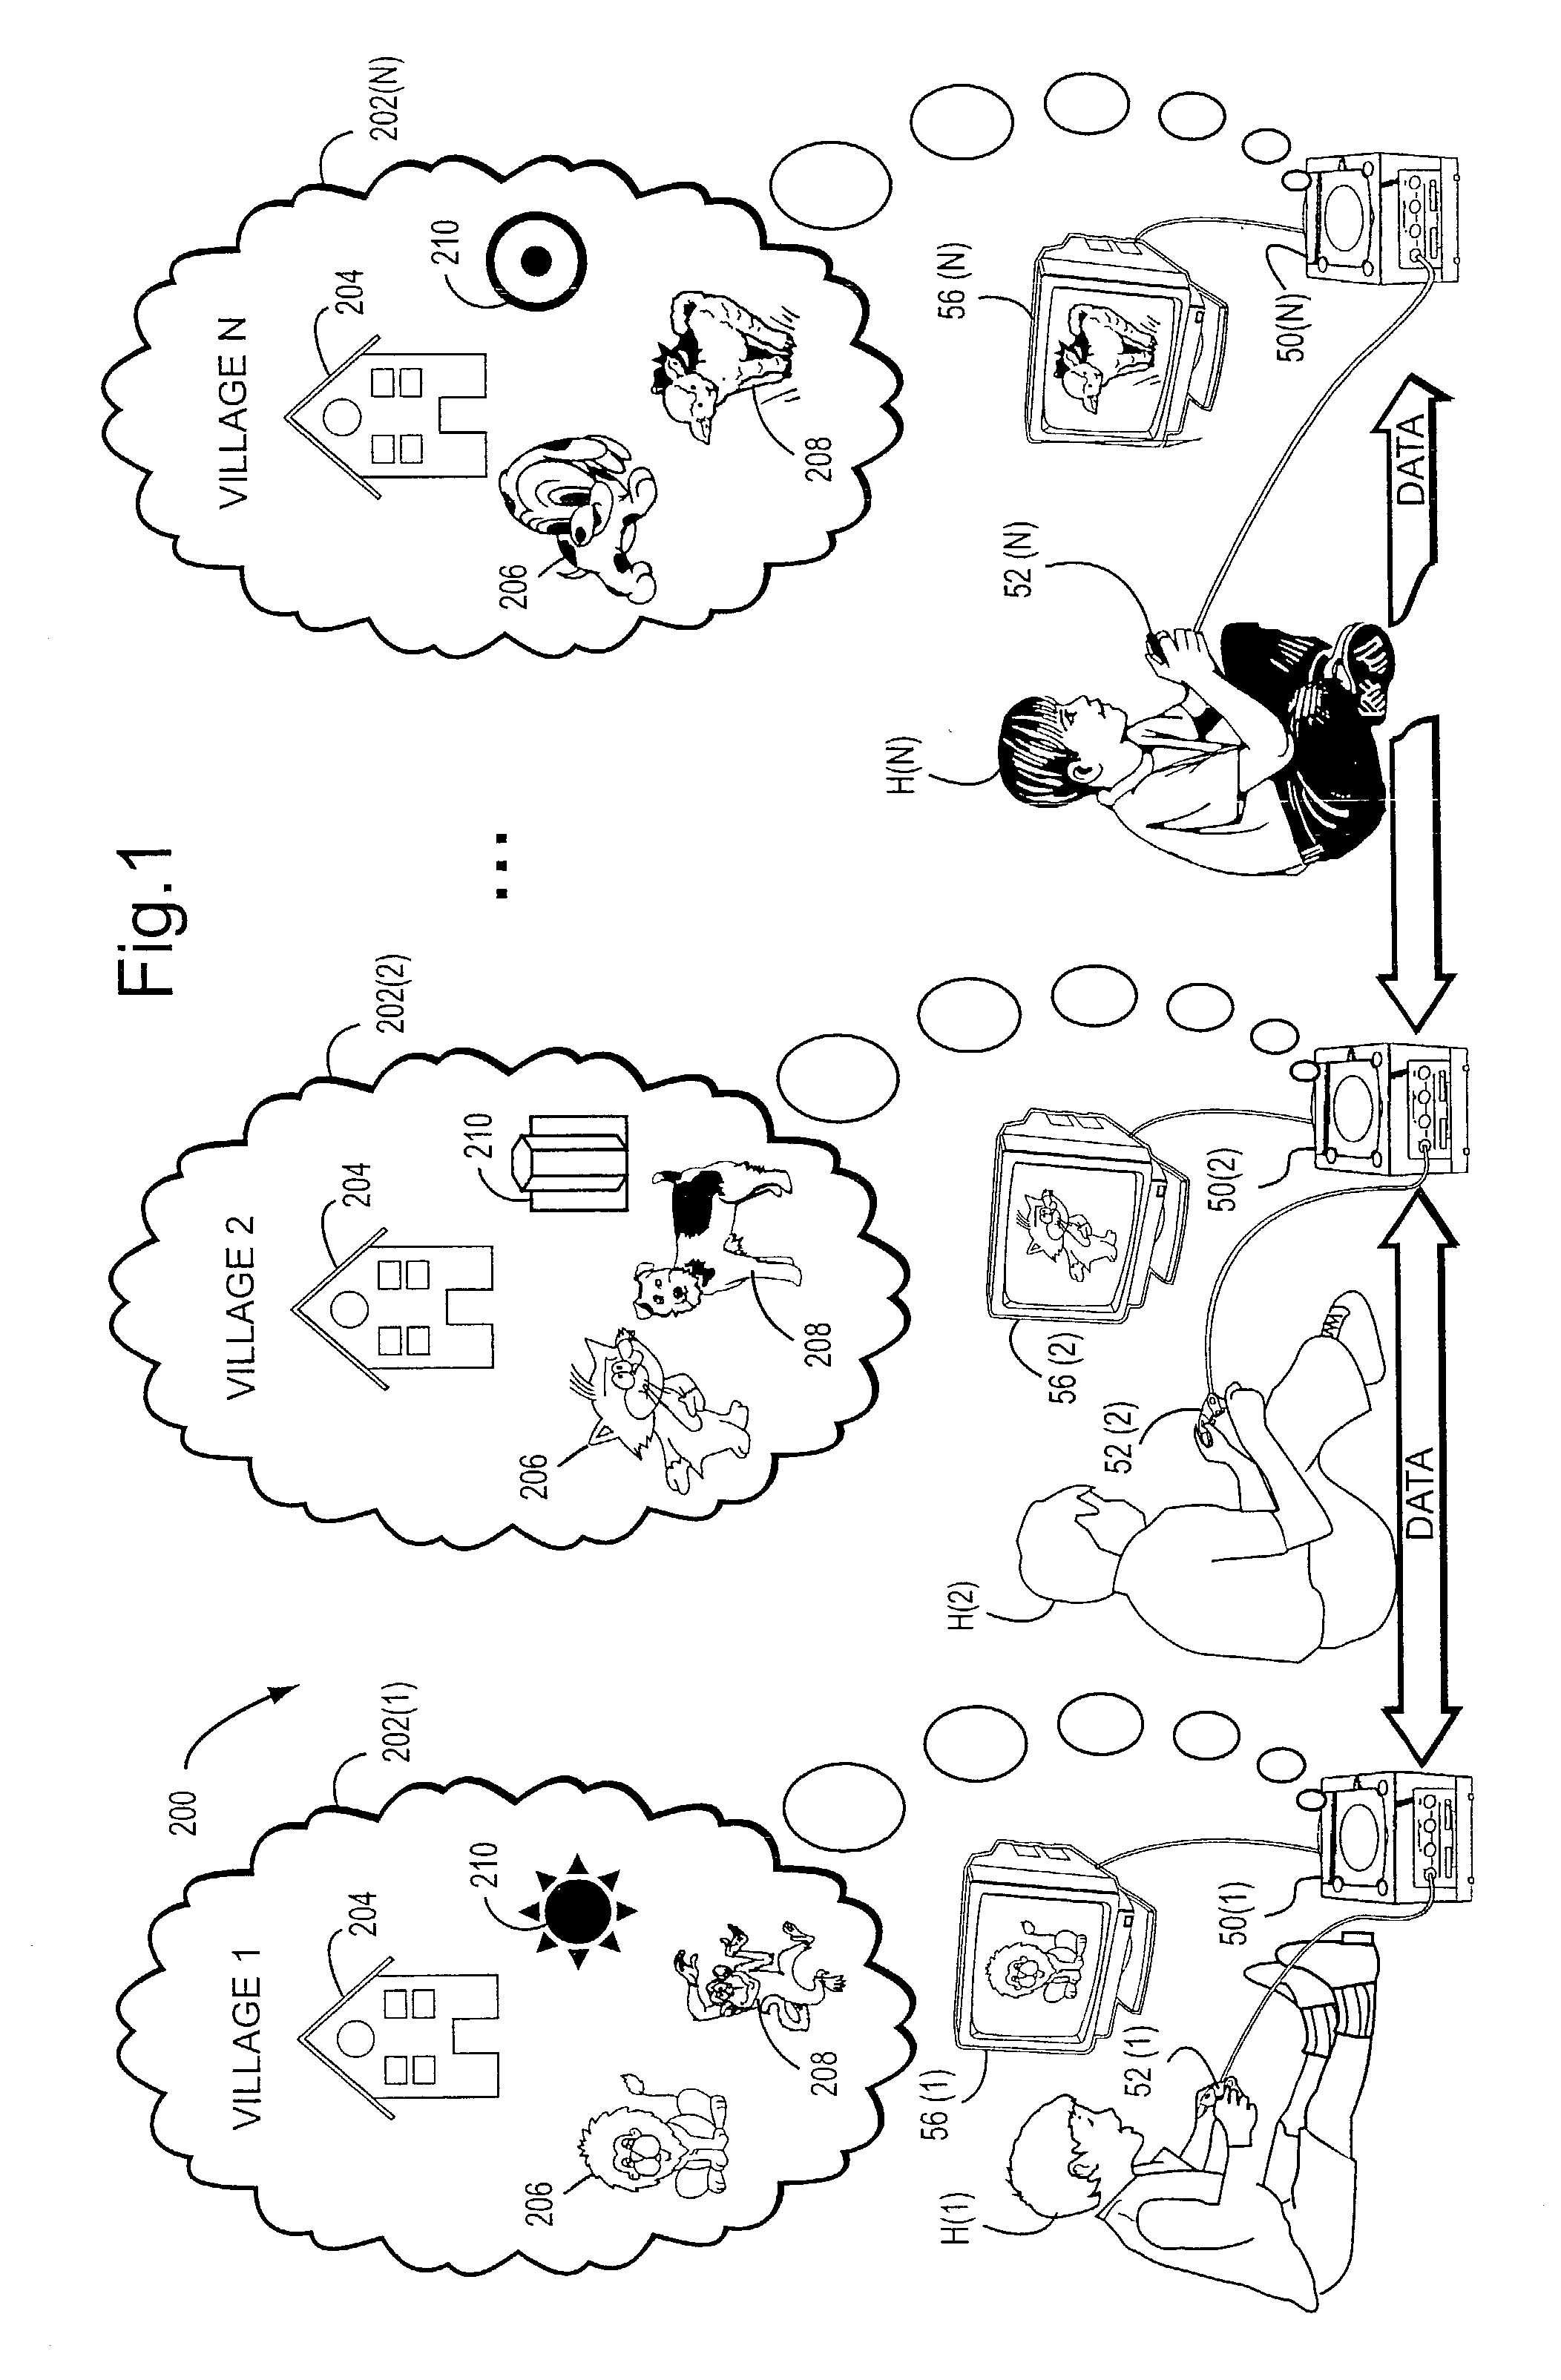 Method and apparatus for multi-user communications using discrete video game platforms